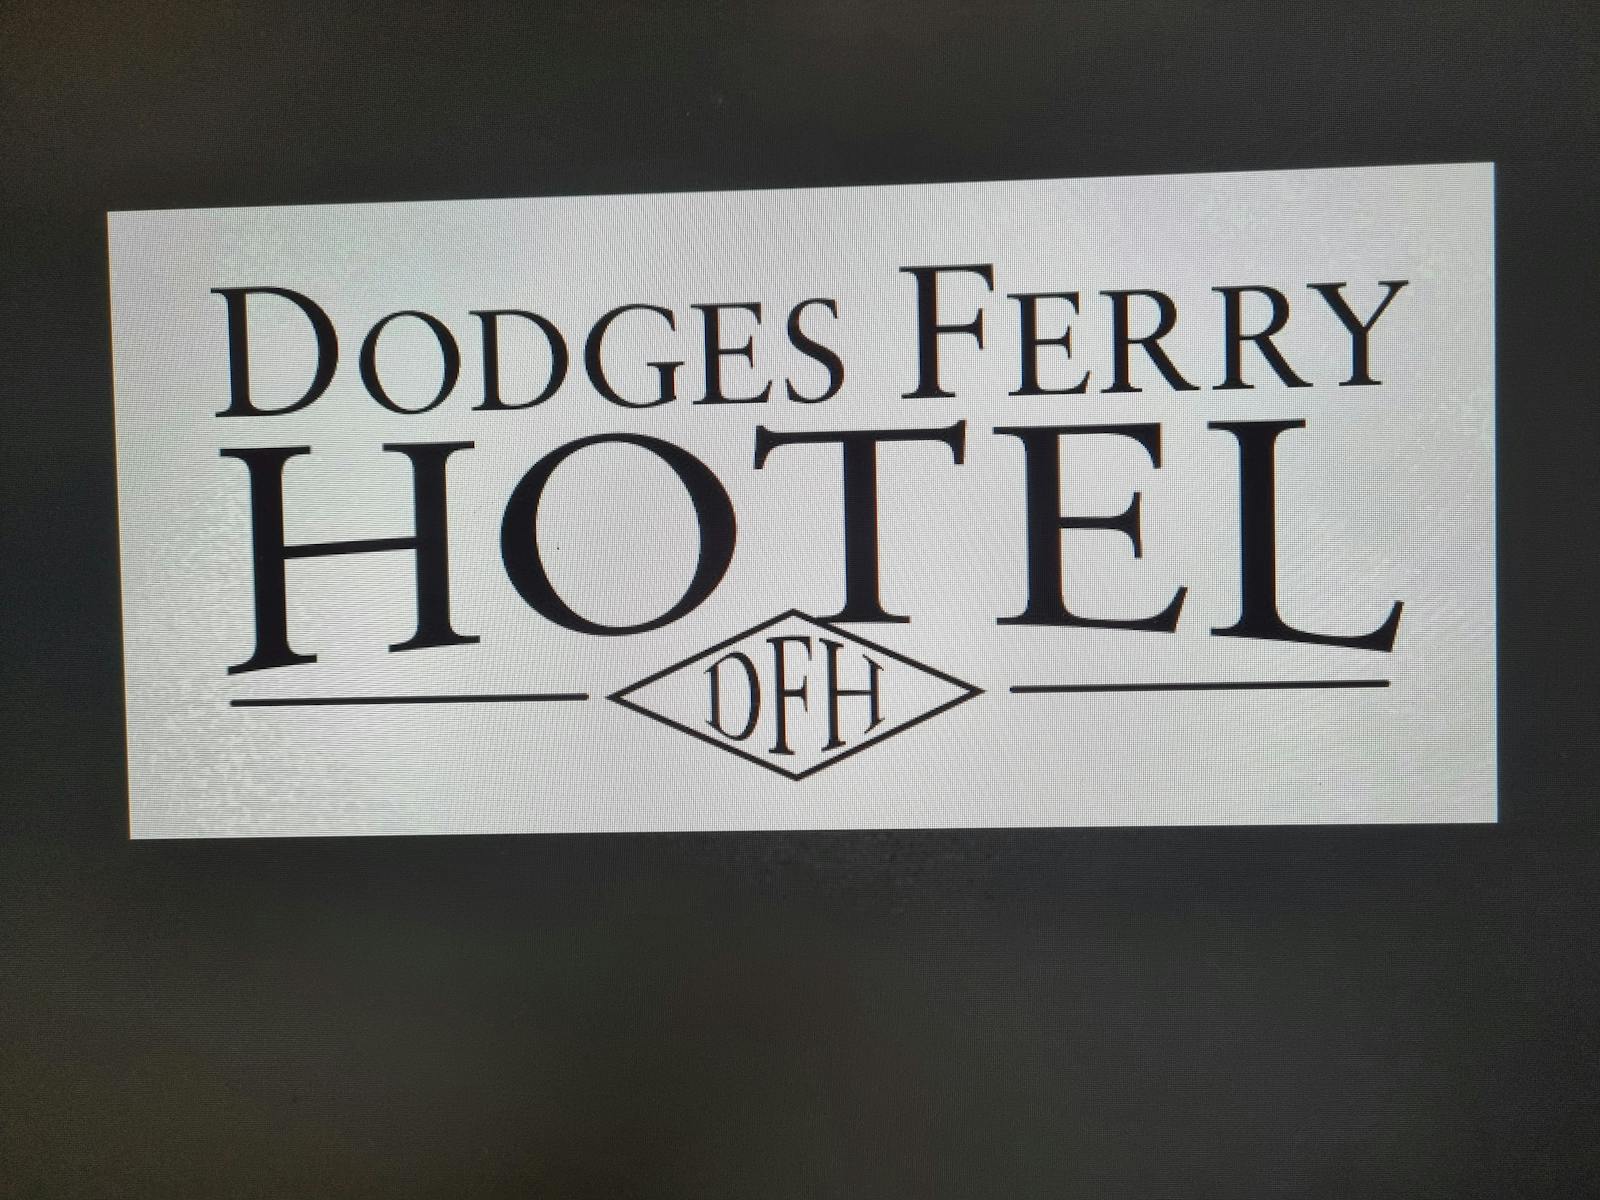 Dodges ferry Hotel